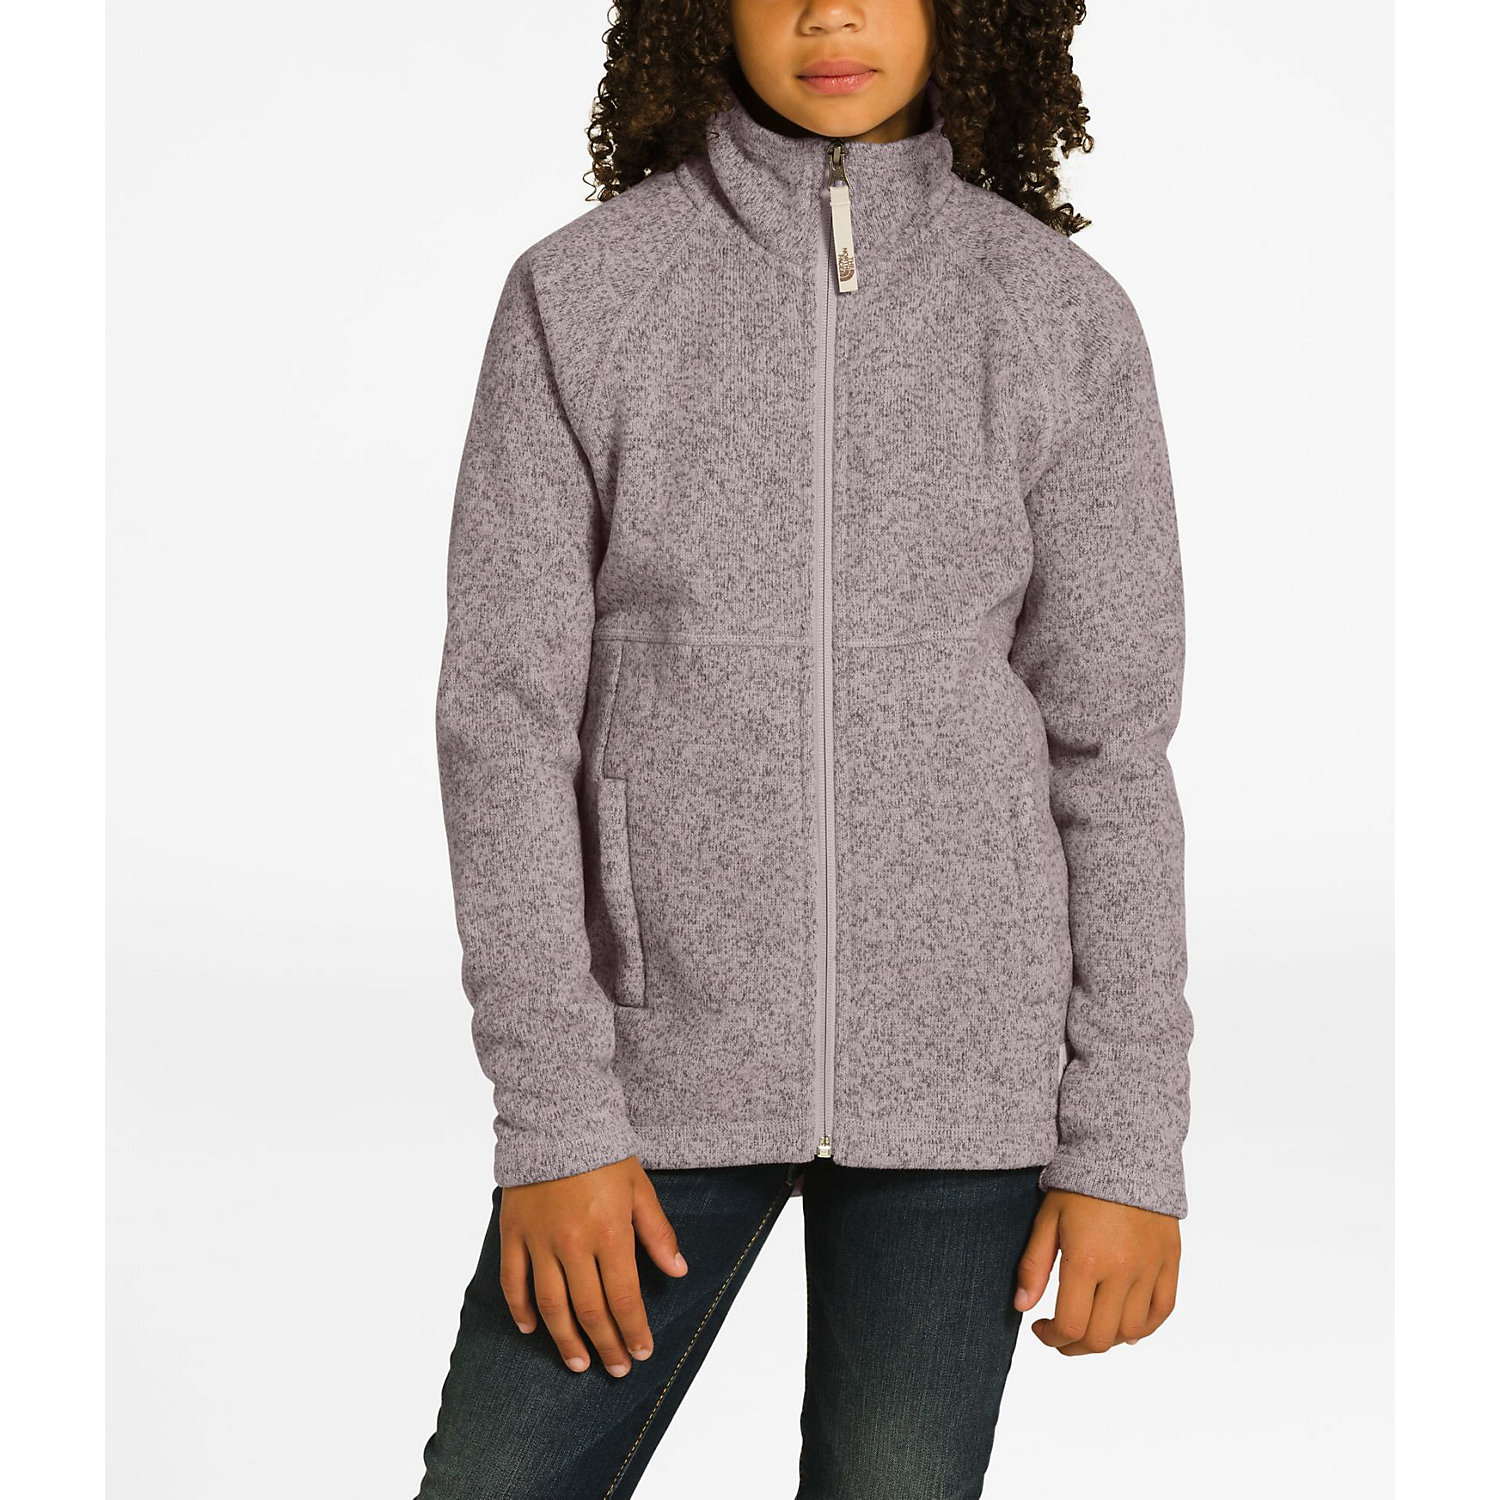 The North Face Girls Crescent Full Zip Sweater